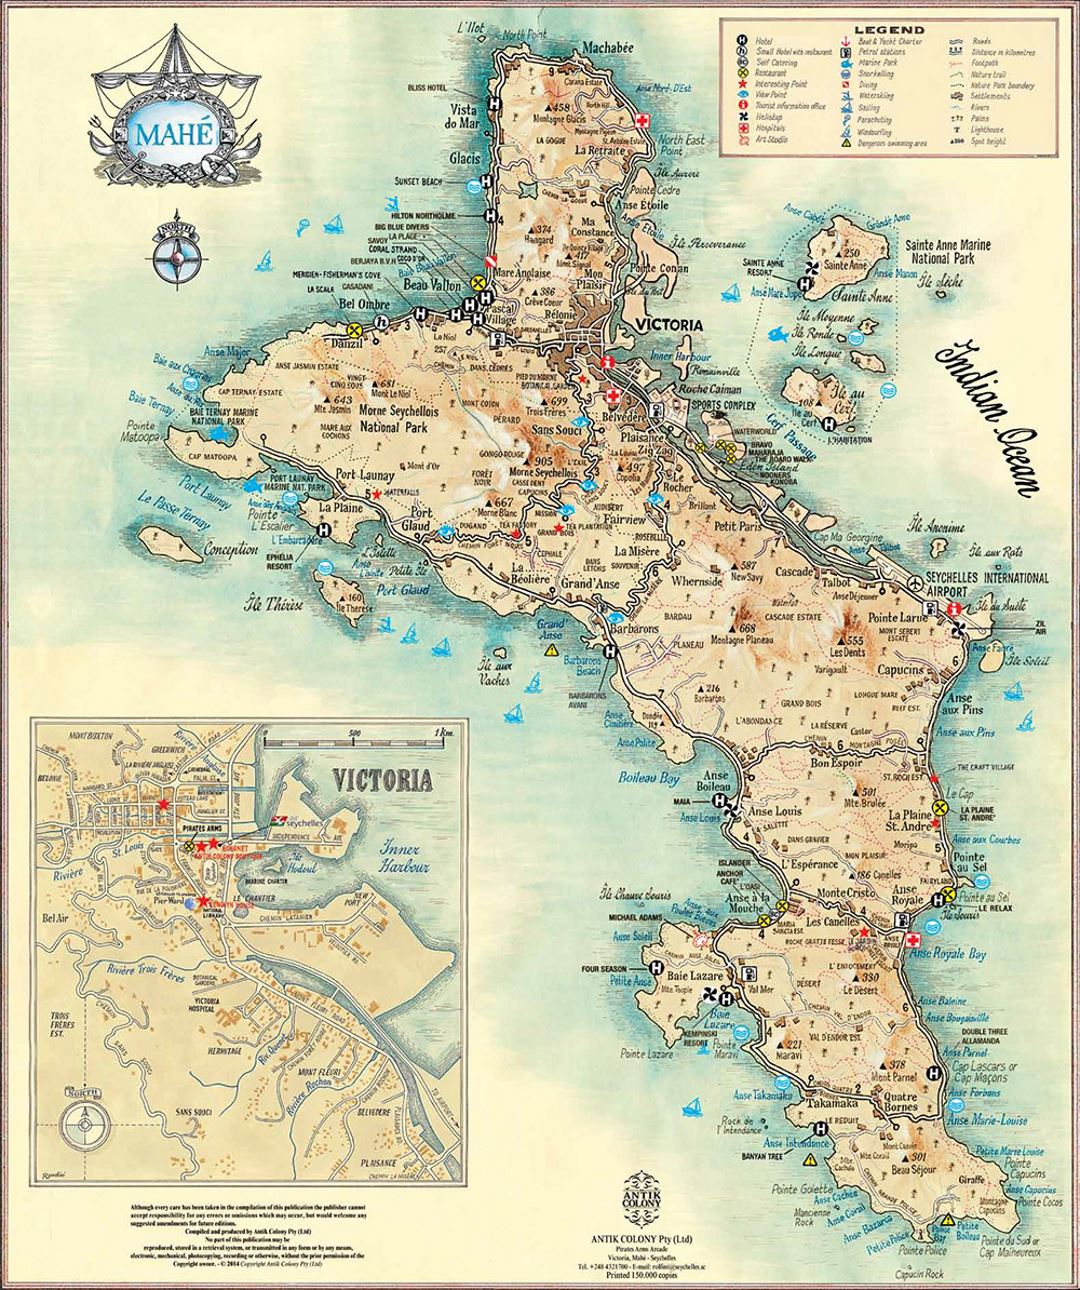 Detailed travel map of Mahe Island, Seychelles with other marks